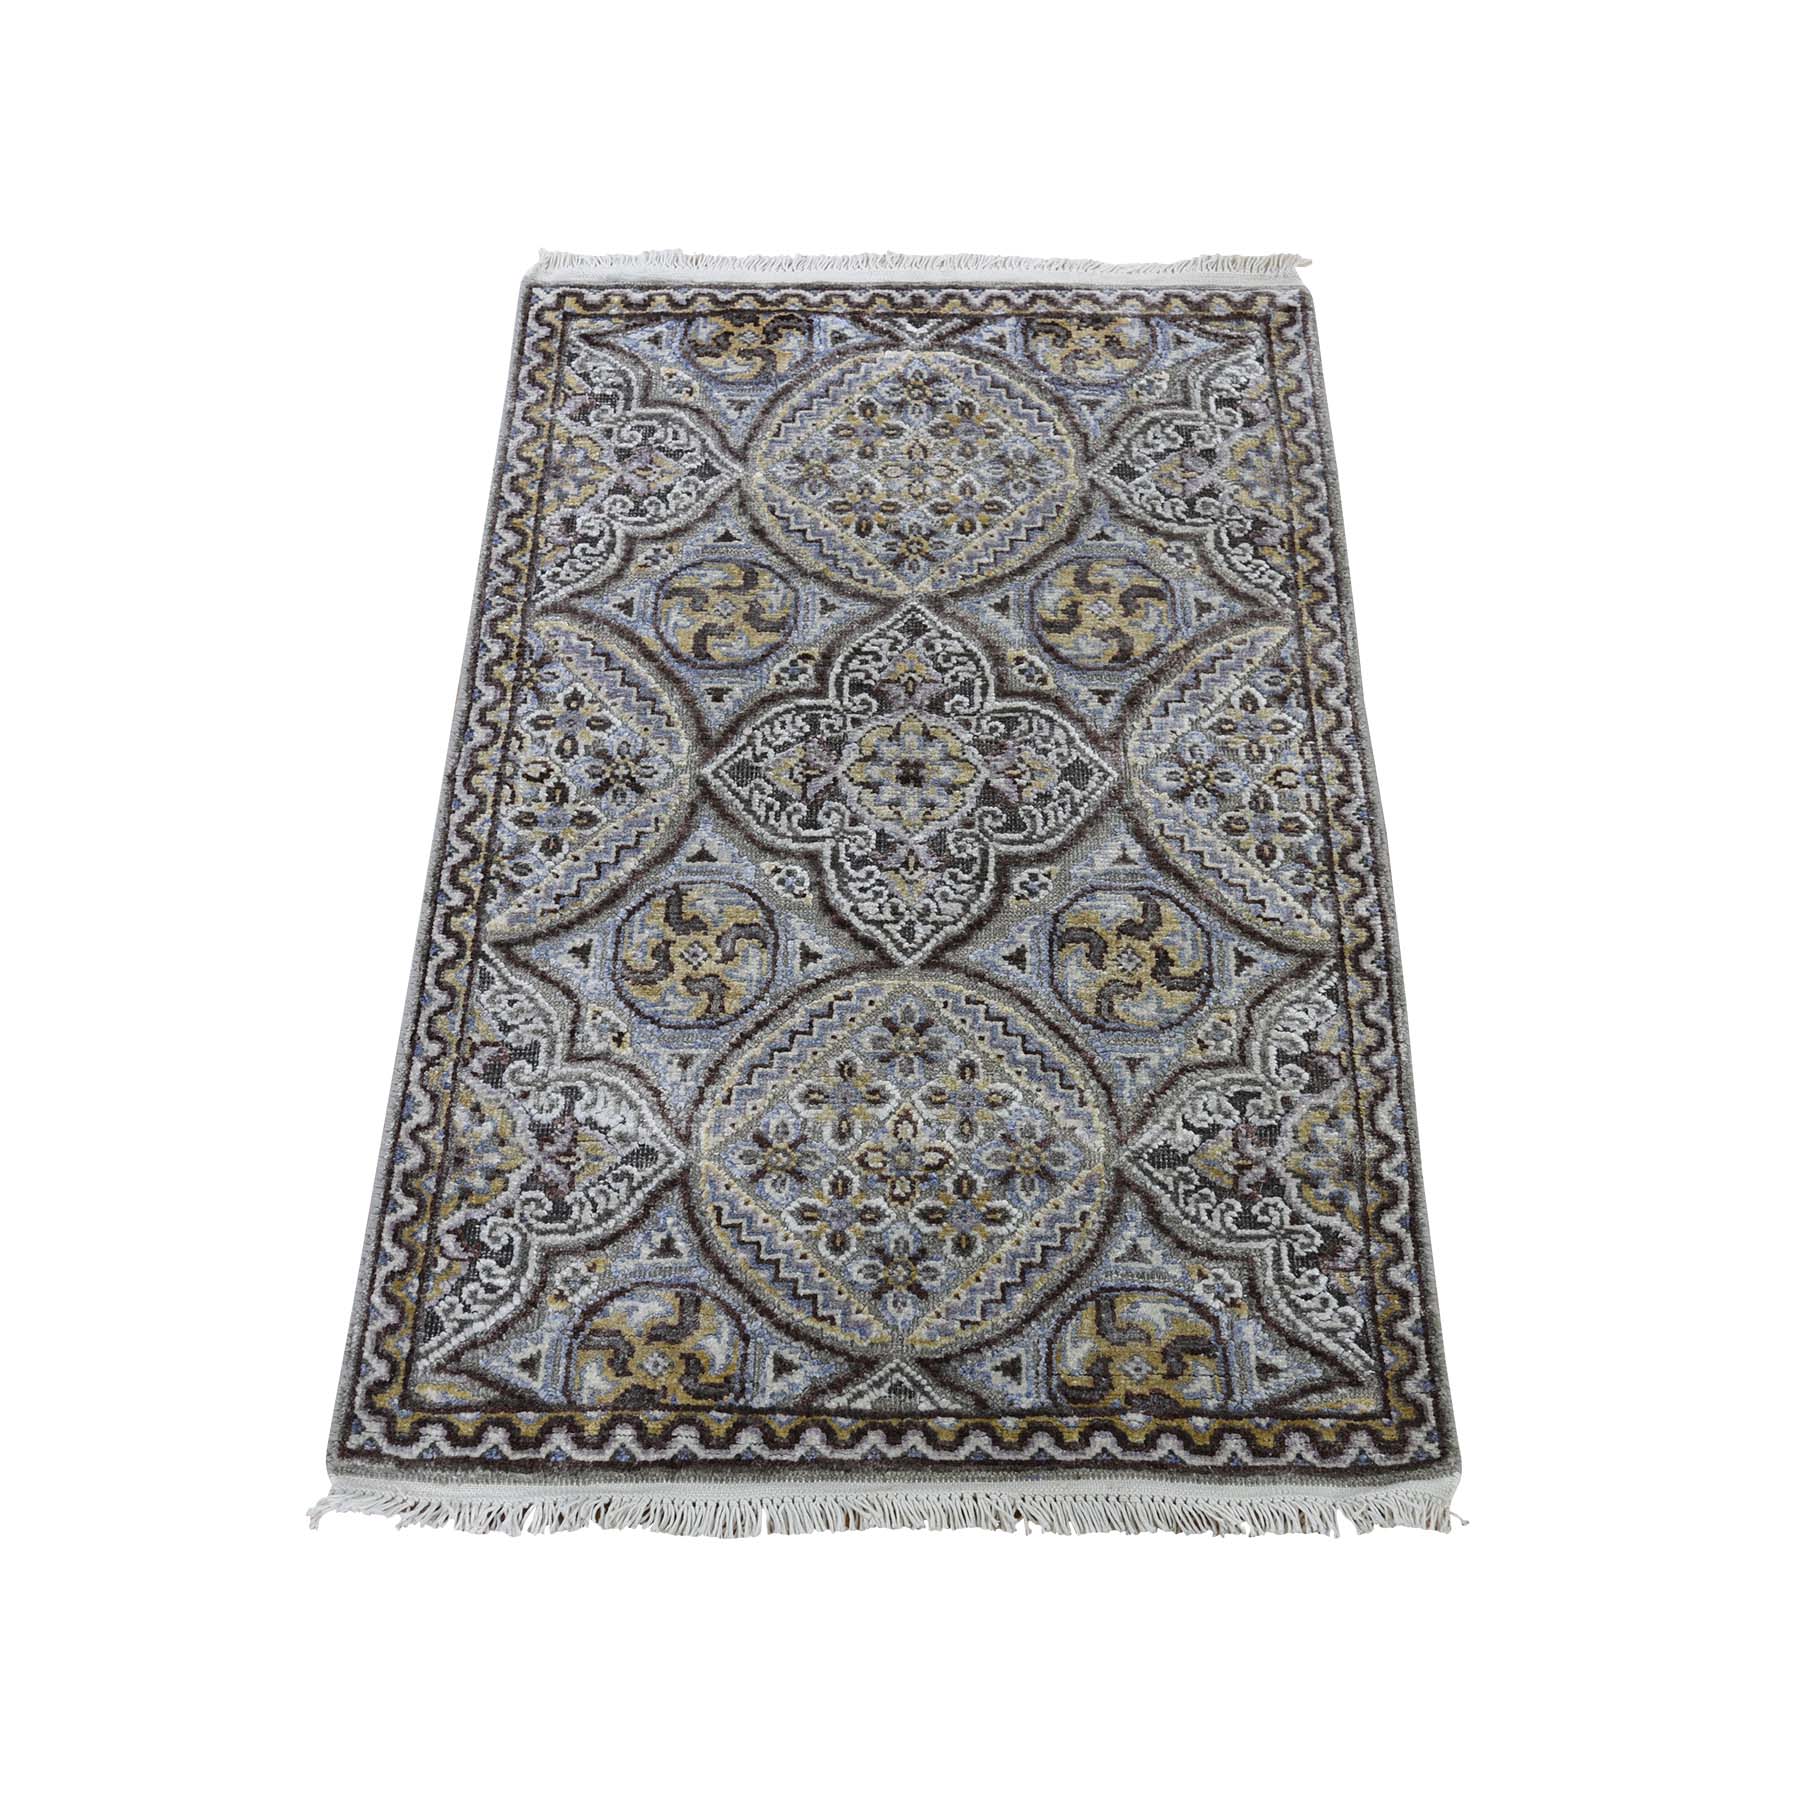 2'1"x3'2" Mughal Inspired Medallions Design Textured Wool and Silk Hand Woven Oriental Rug 